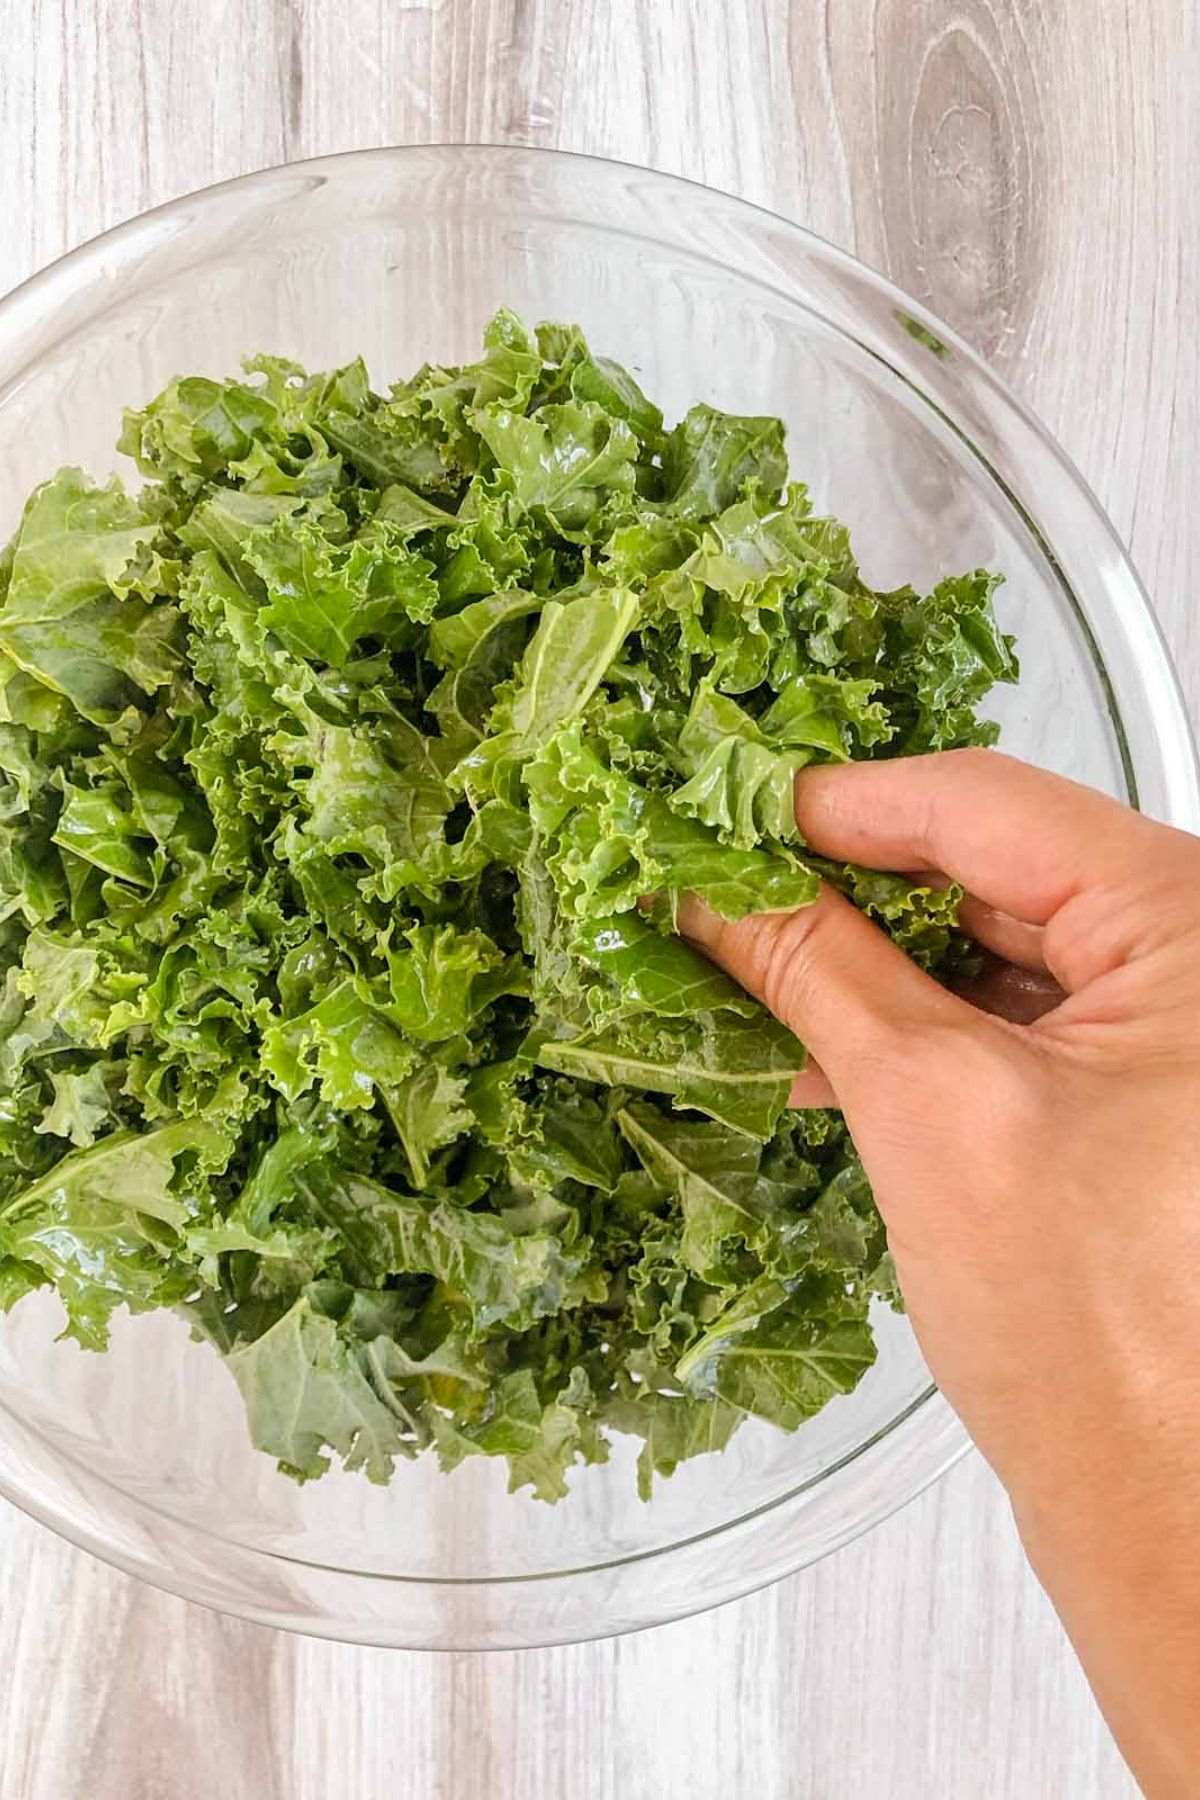 Hand massaging kale leaves in a glass mixing bowl.